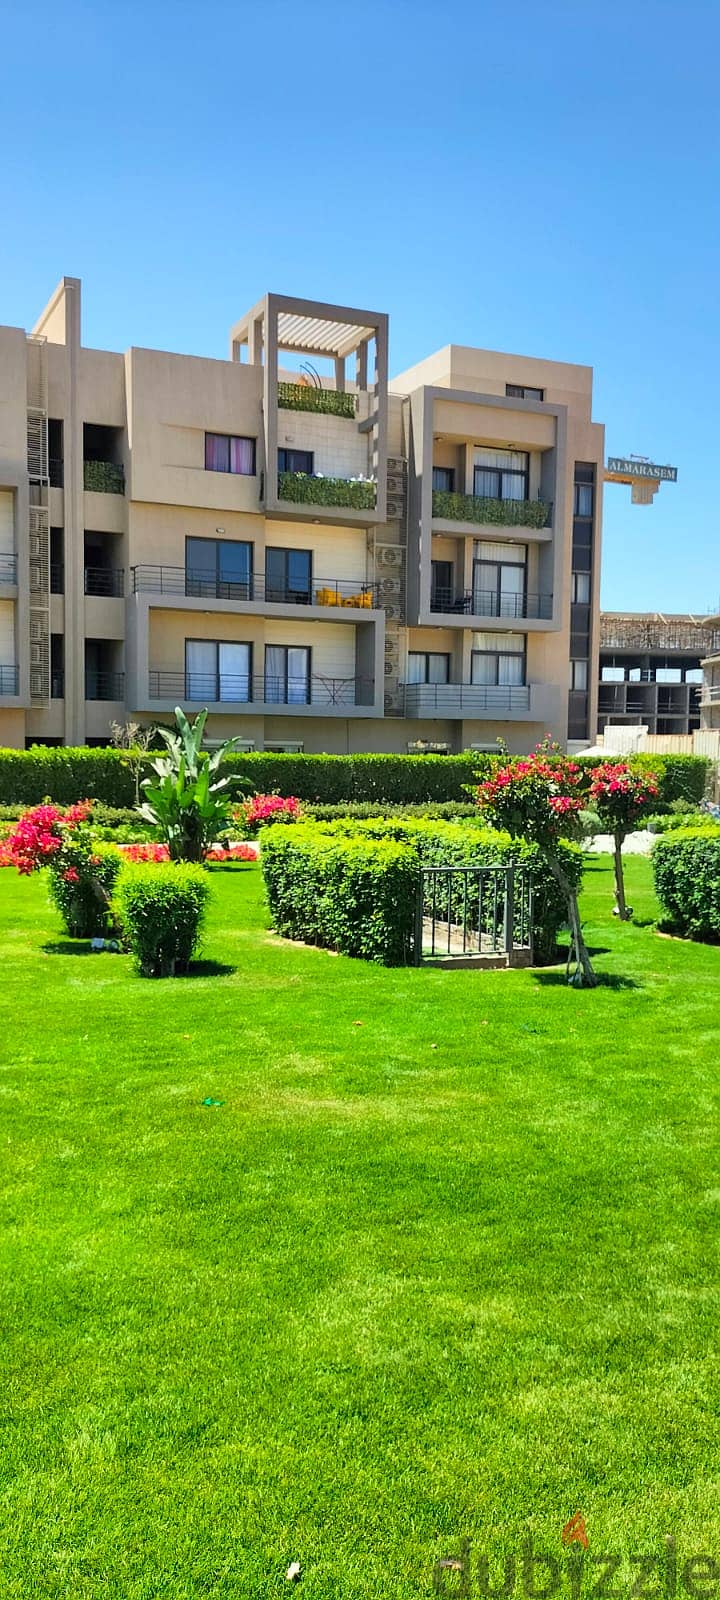 Apartment in installments for sale, fully finished, with air conditioners and price including maintenance and garage. 3